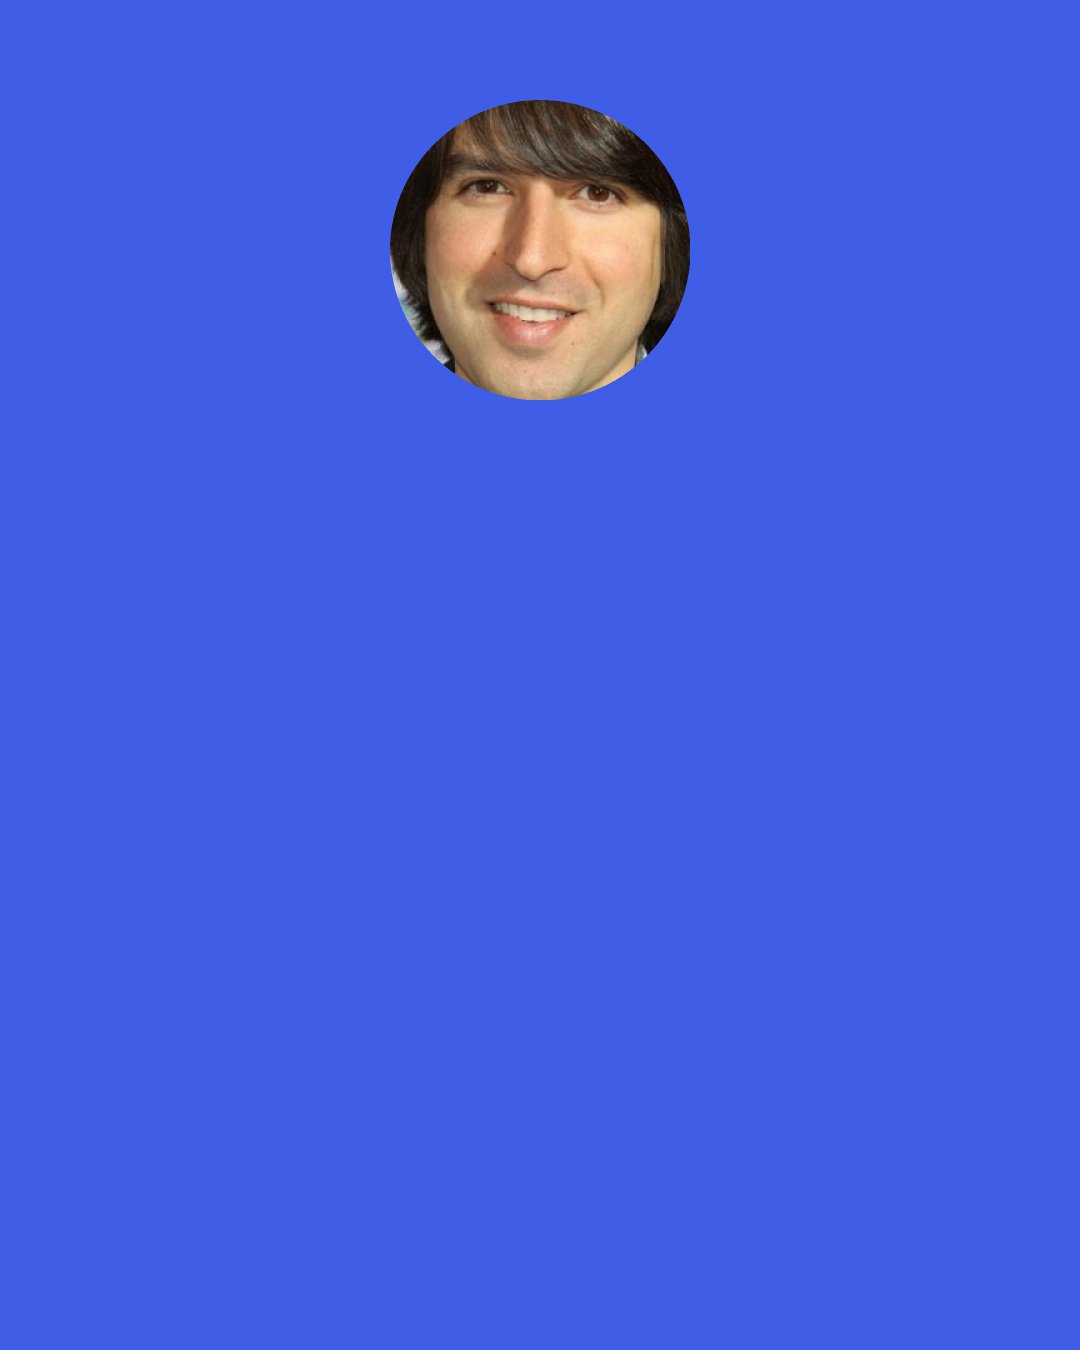 Demetri Martin: Sometimes I feel like I'm making a connection with a stranger, but then it turns out I'm not. Like, I was in a mall, and I saw this lady hitting her kid. So I went up to her, and I was like, "Yeah, get him!" She got all mad at me. I was like, "I'm on your side here."